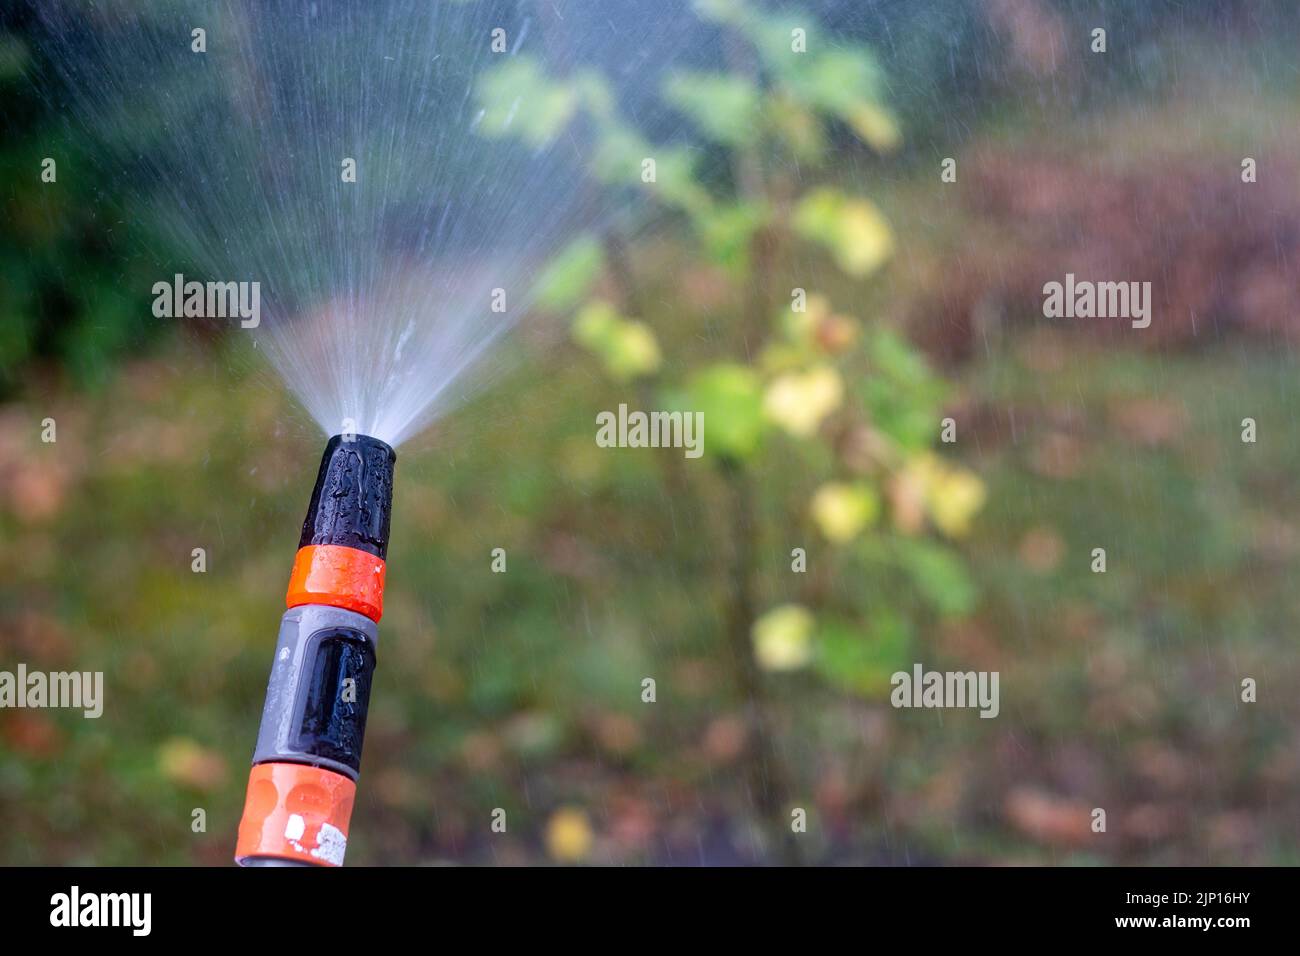 A garden hosepipe in use this morning to water plants at a time when hospipe bans are being considered in many European countries to cope with the dry Stock Photo